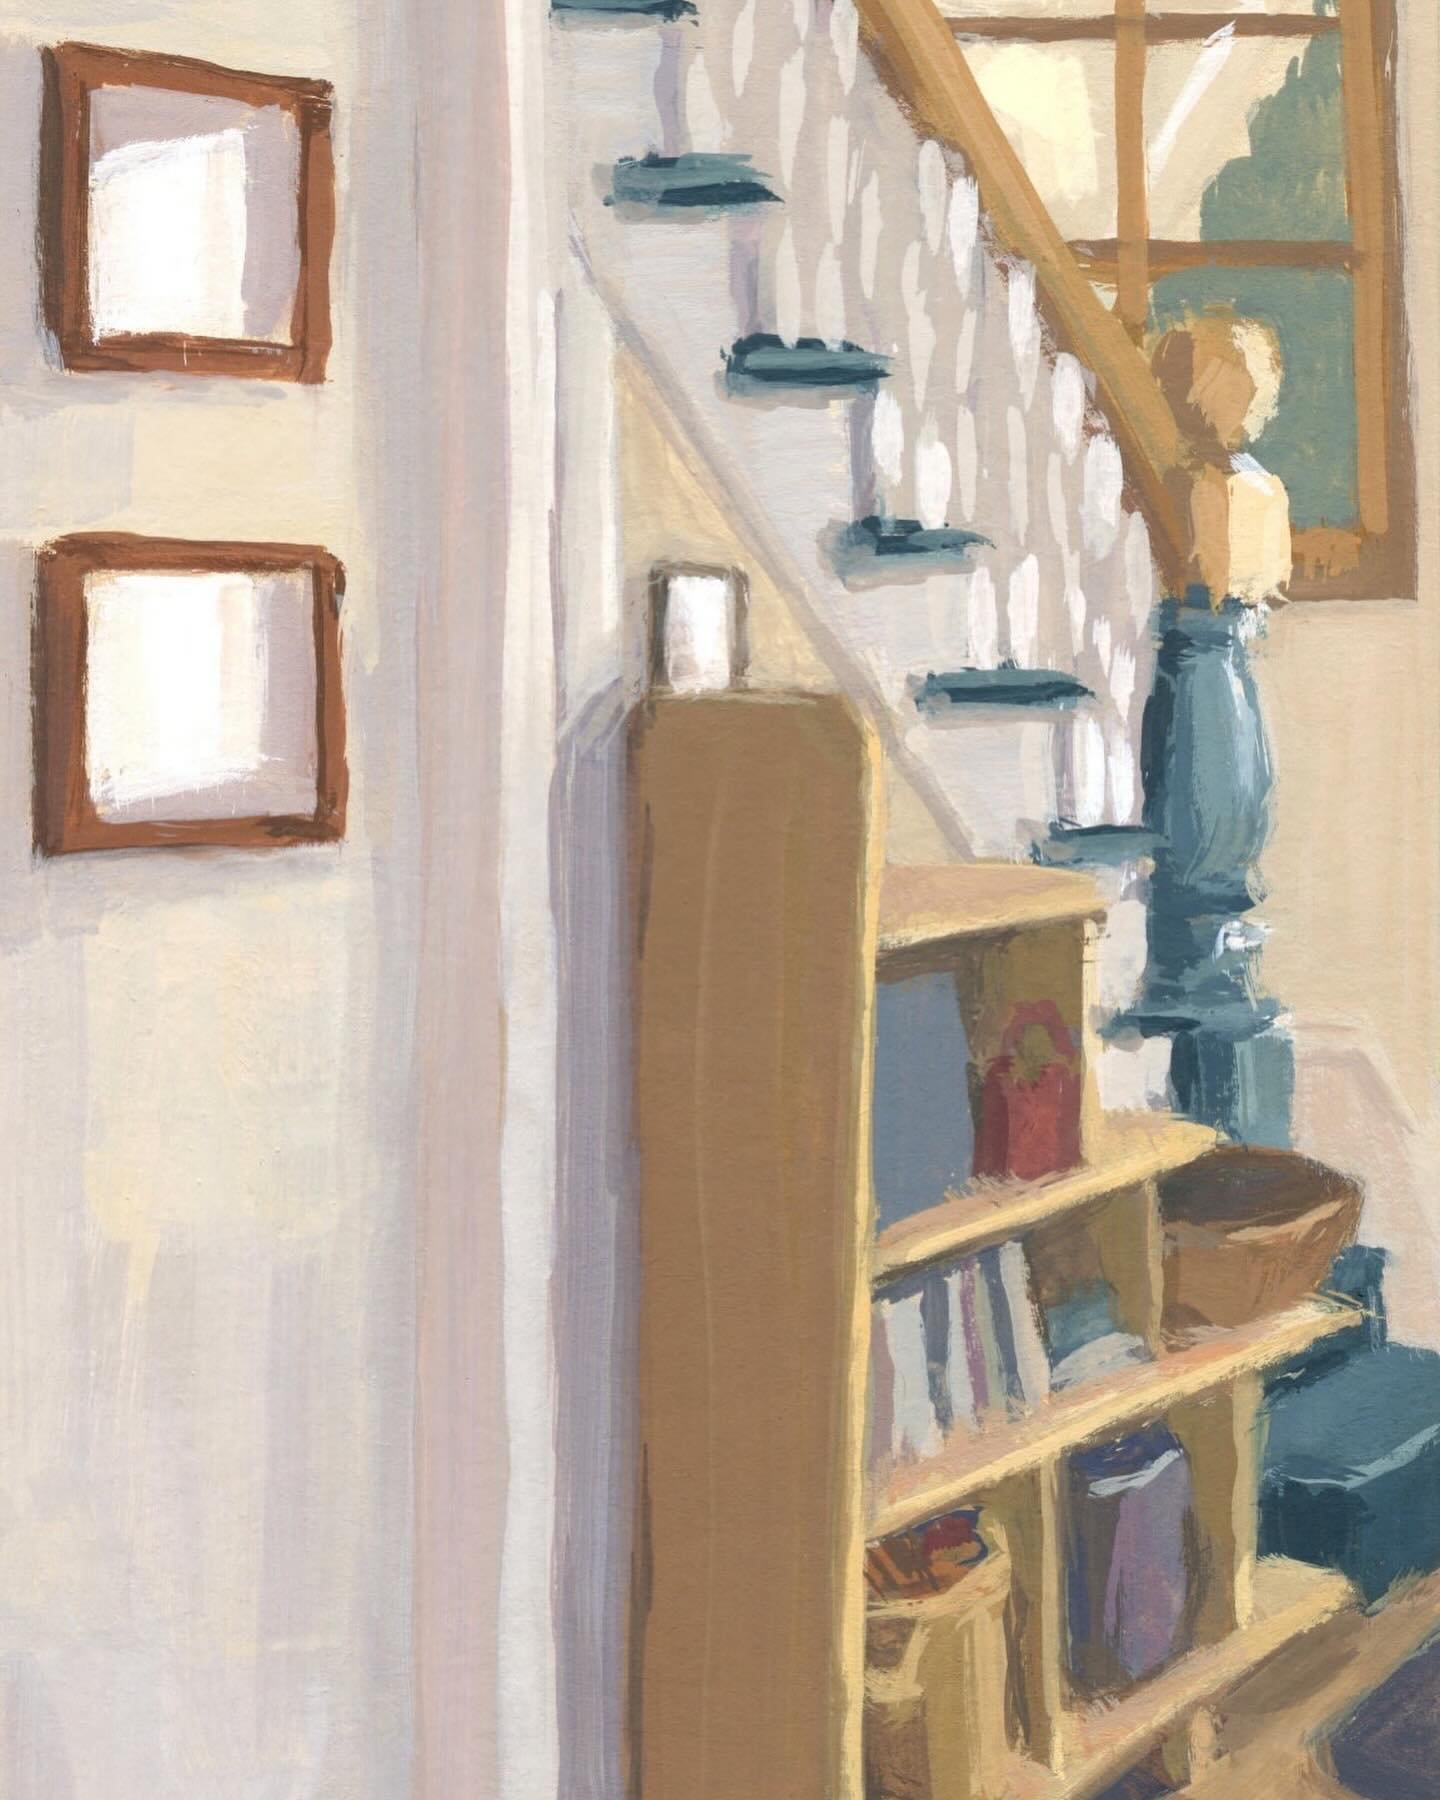 The previous owners made this simple custom shelf to fit below the stairs. It&rsquo;s perfect for baskets of scarves, books, and things you grab before heading out the door! 🧣✨

🎨 This painting was made using just a few tools and a simple process t